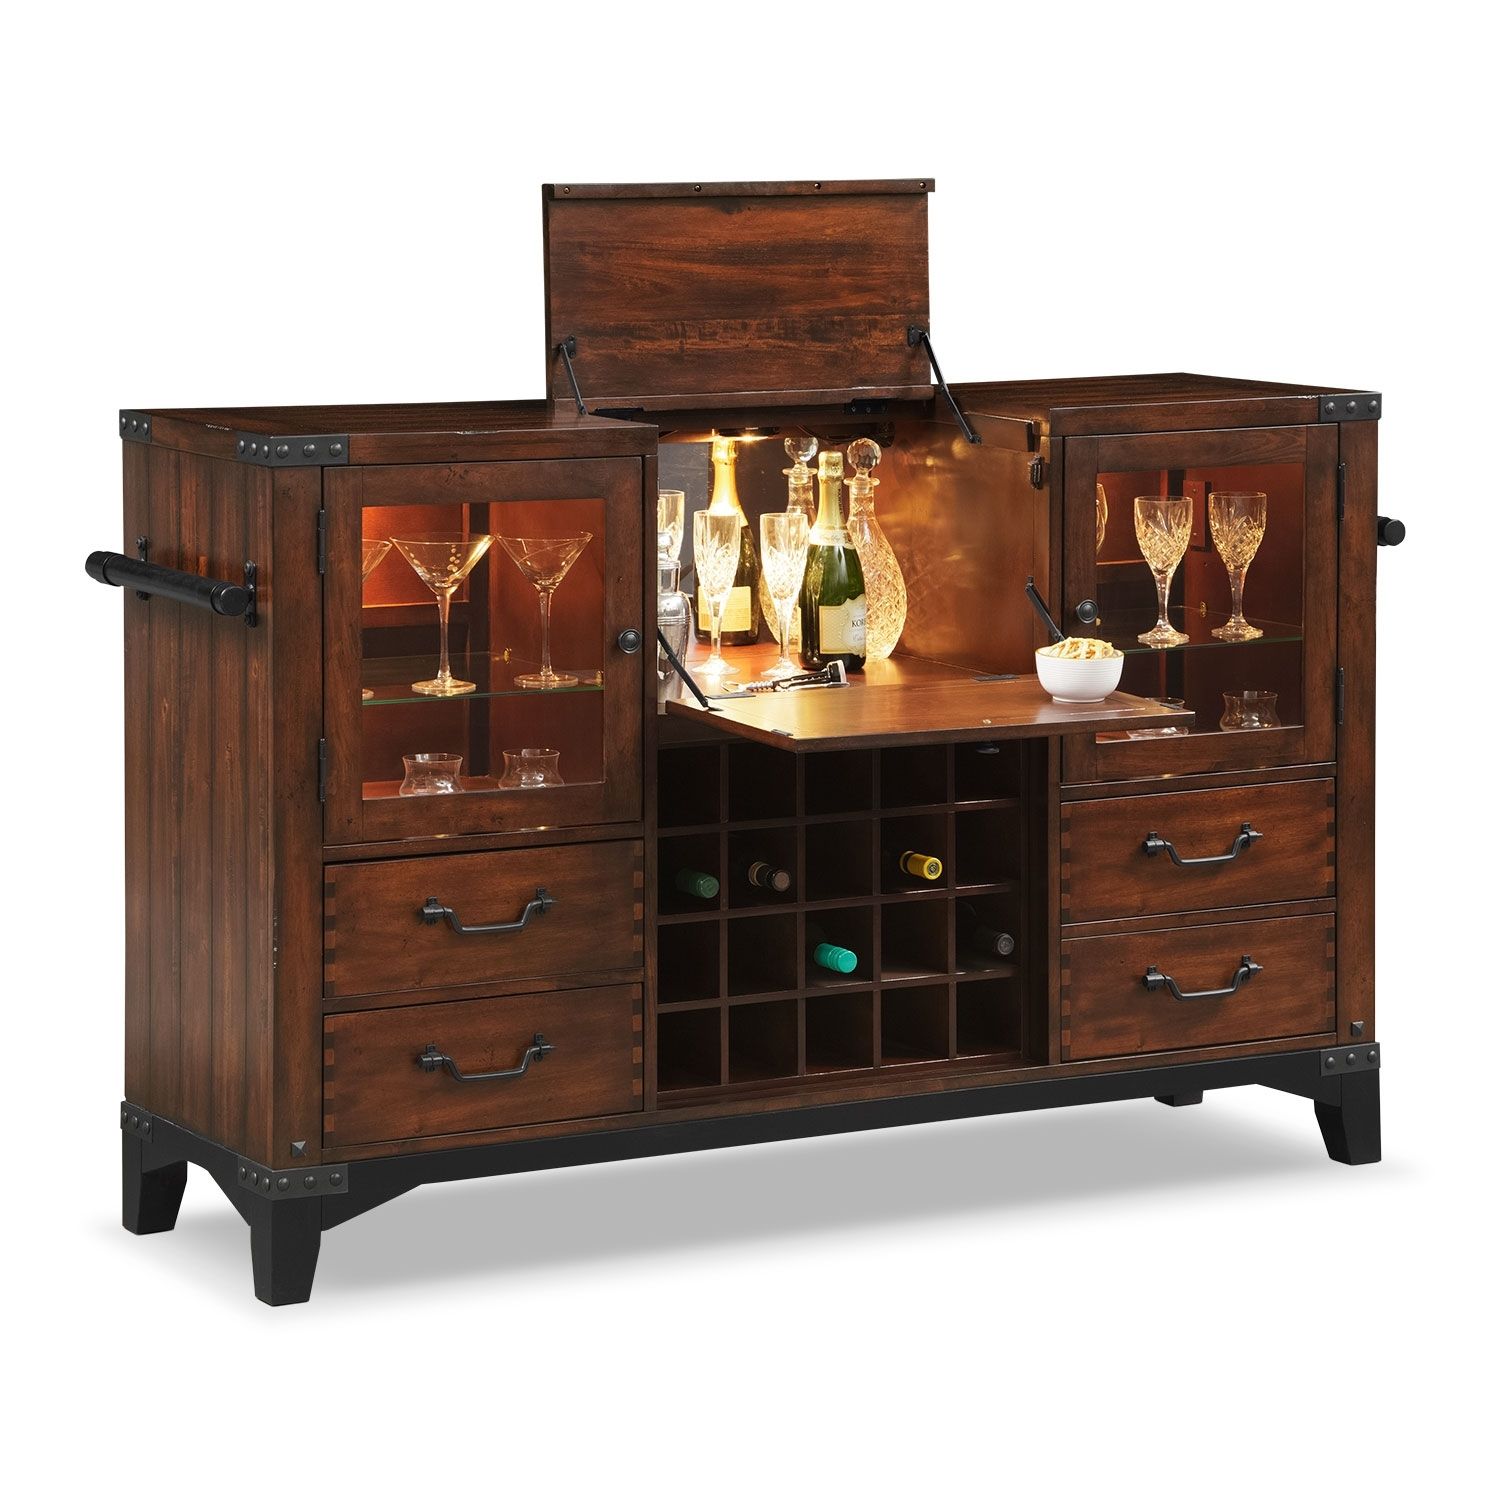 Buffet & Sideboard Cabinets | Value City Intended For Brown Wood 72 Inch Sideboards (View 29 of 30)